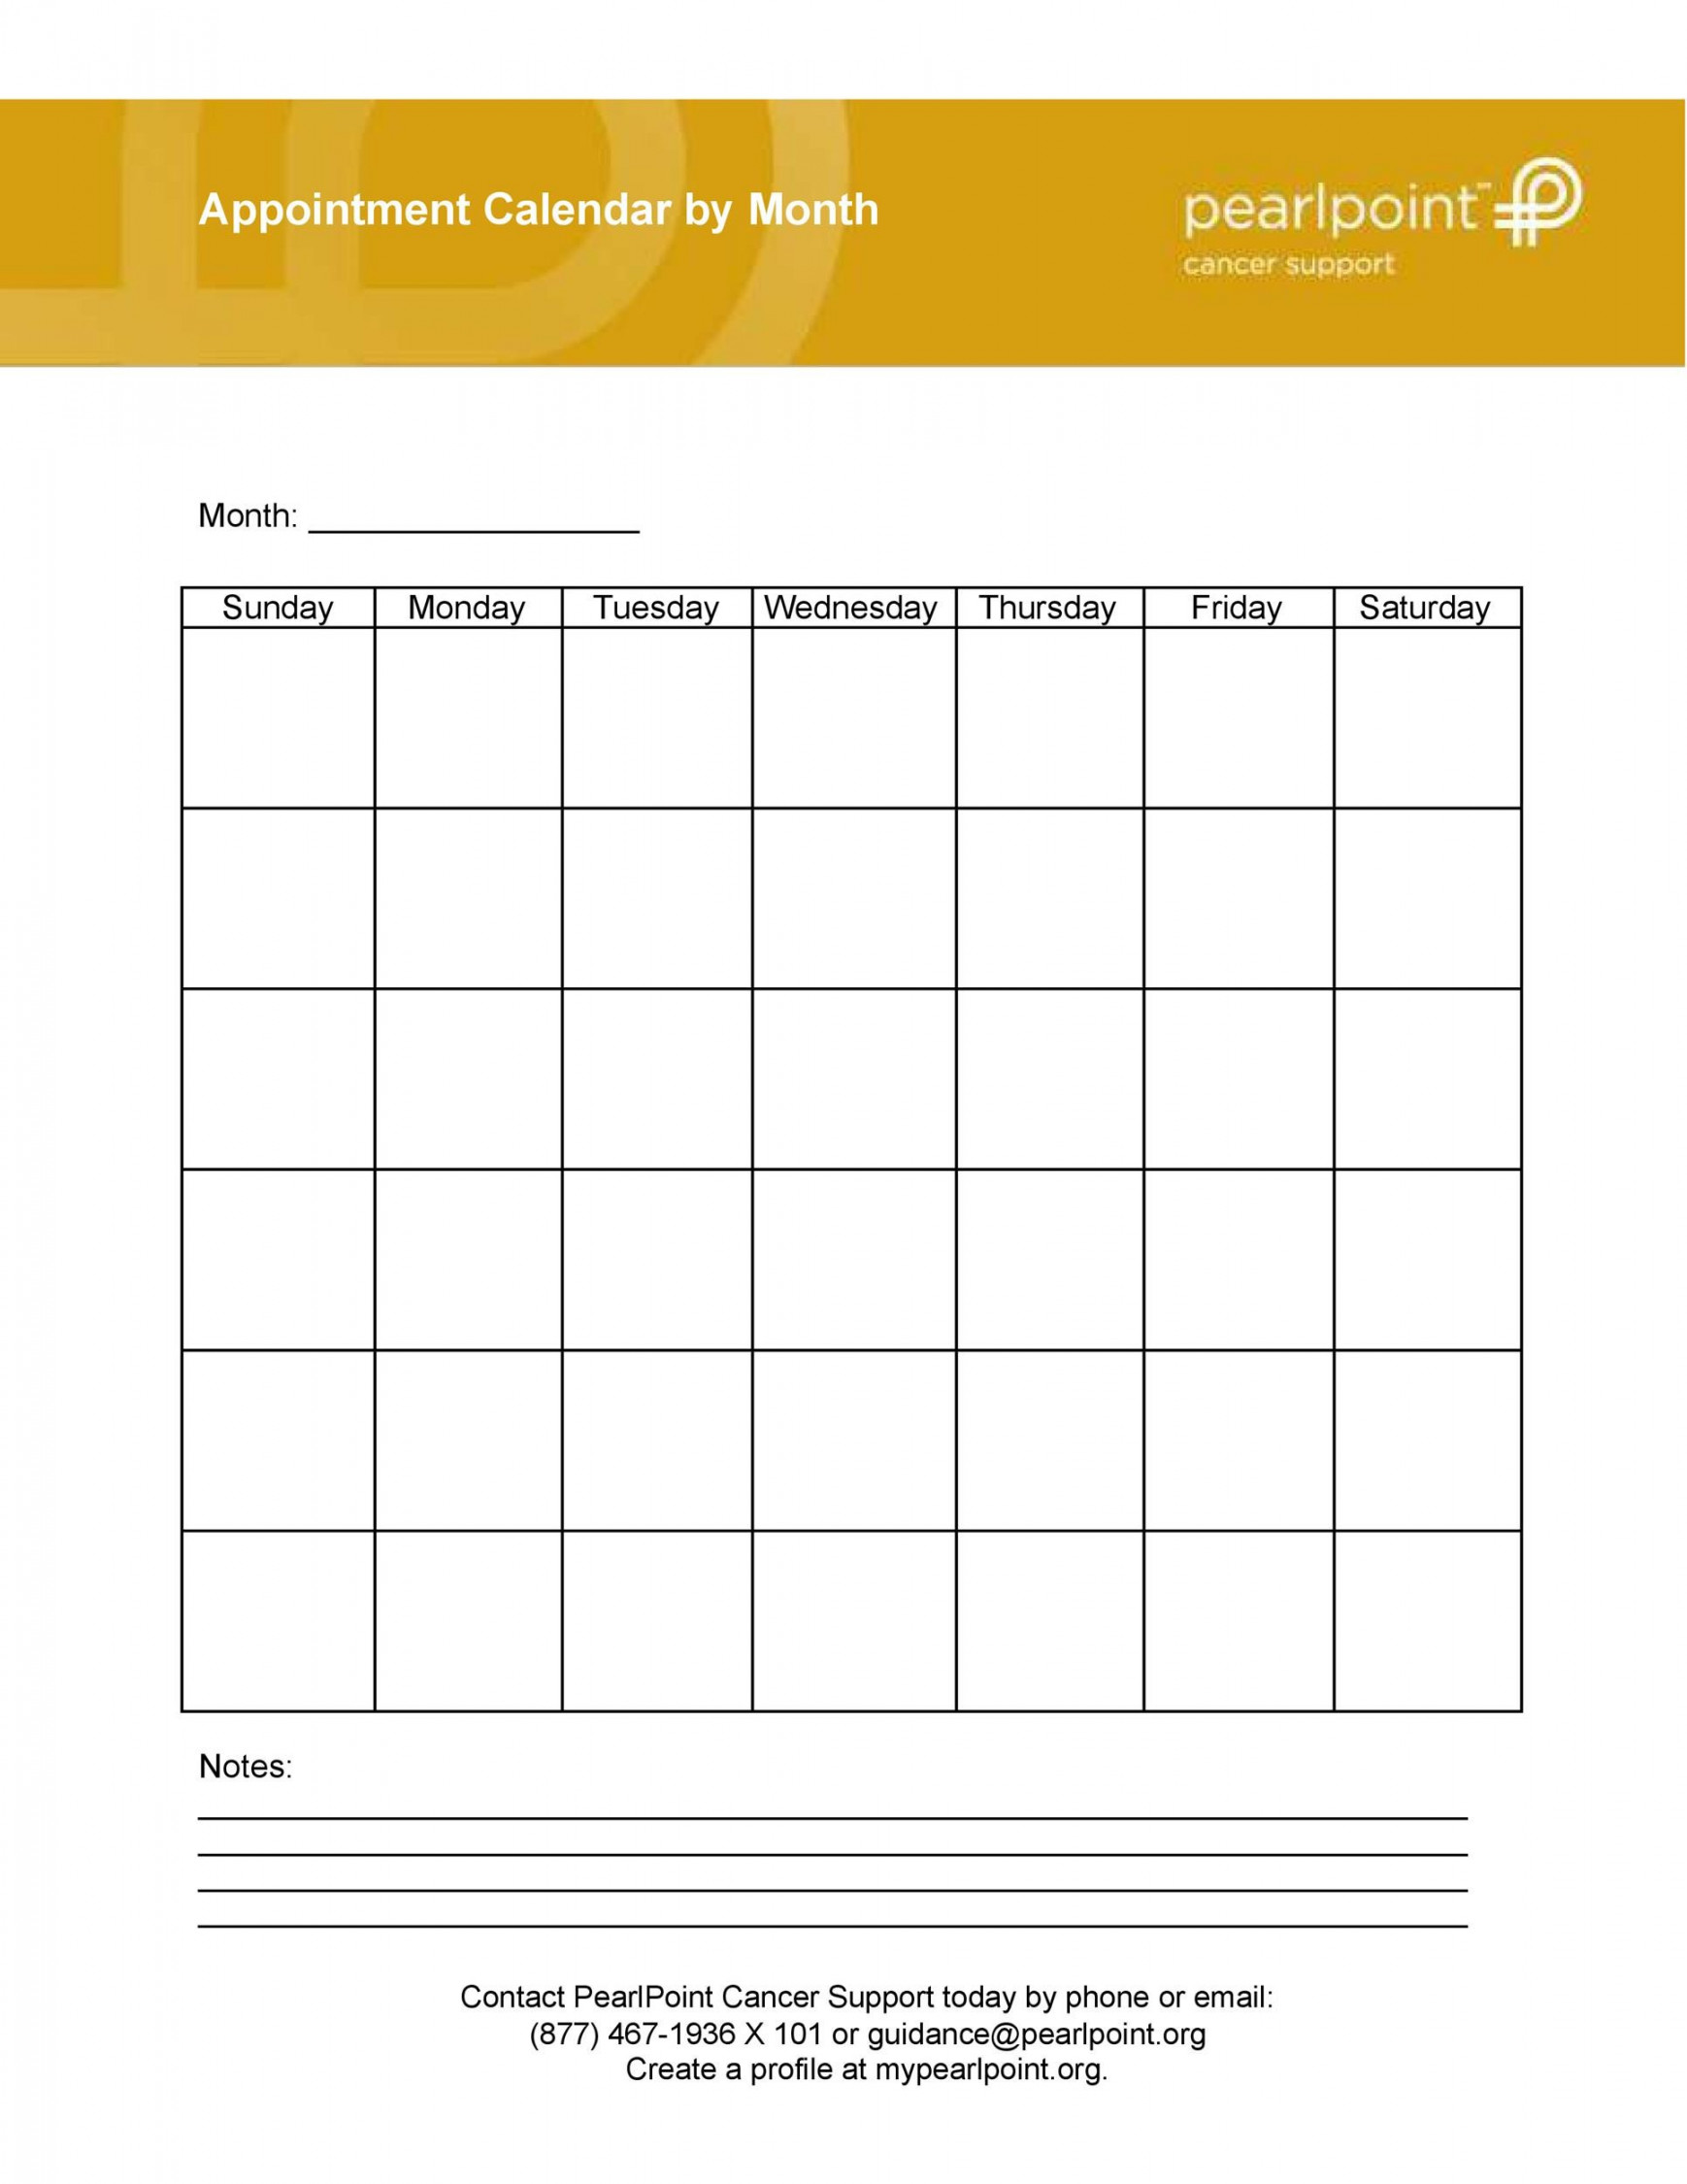 Printable Appointment Schedule Templates [& Appointment Calendars]